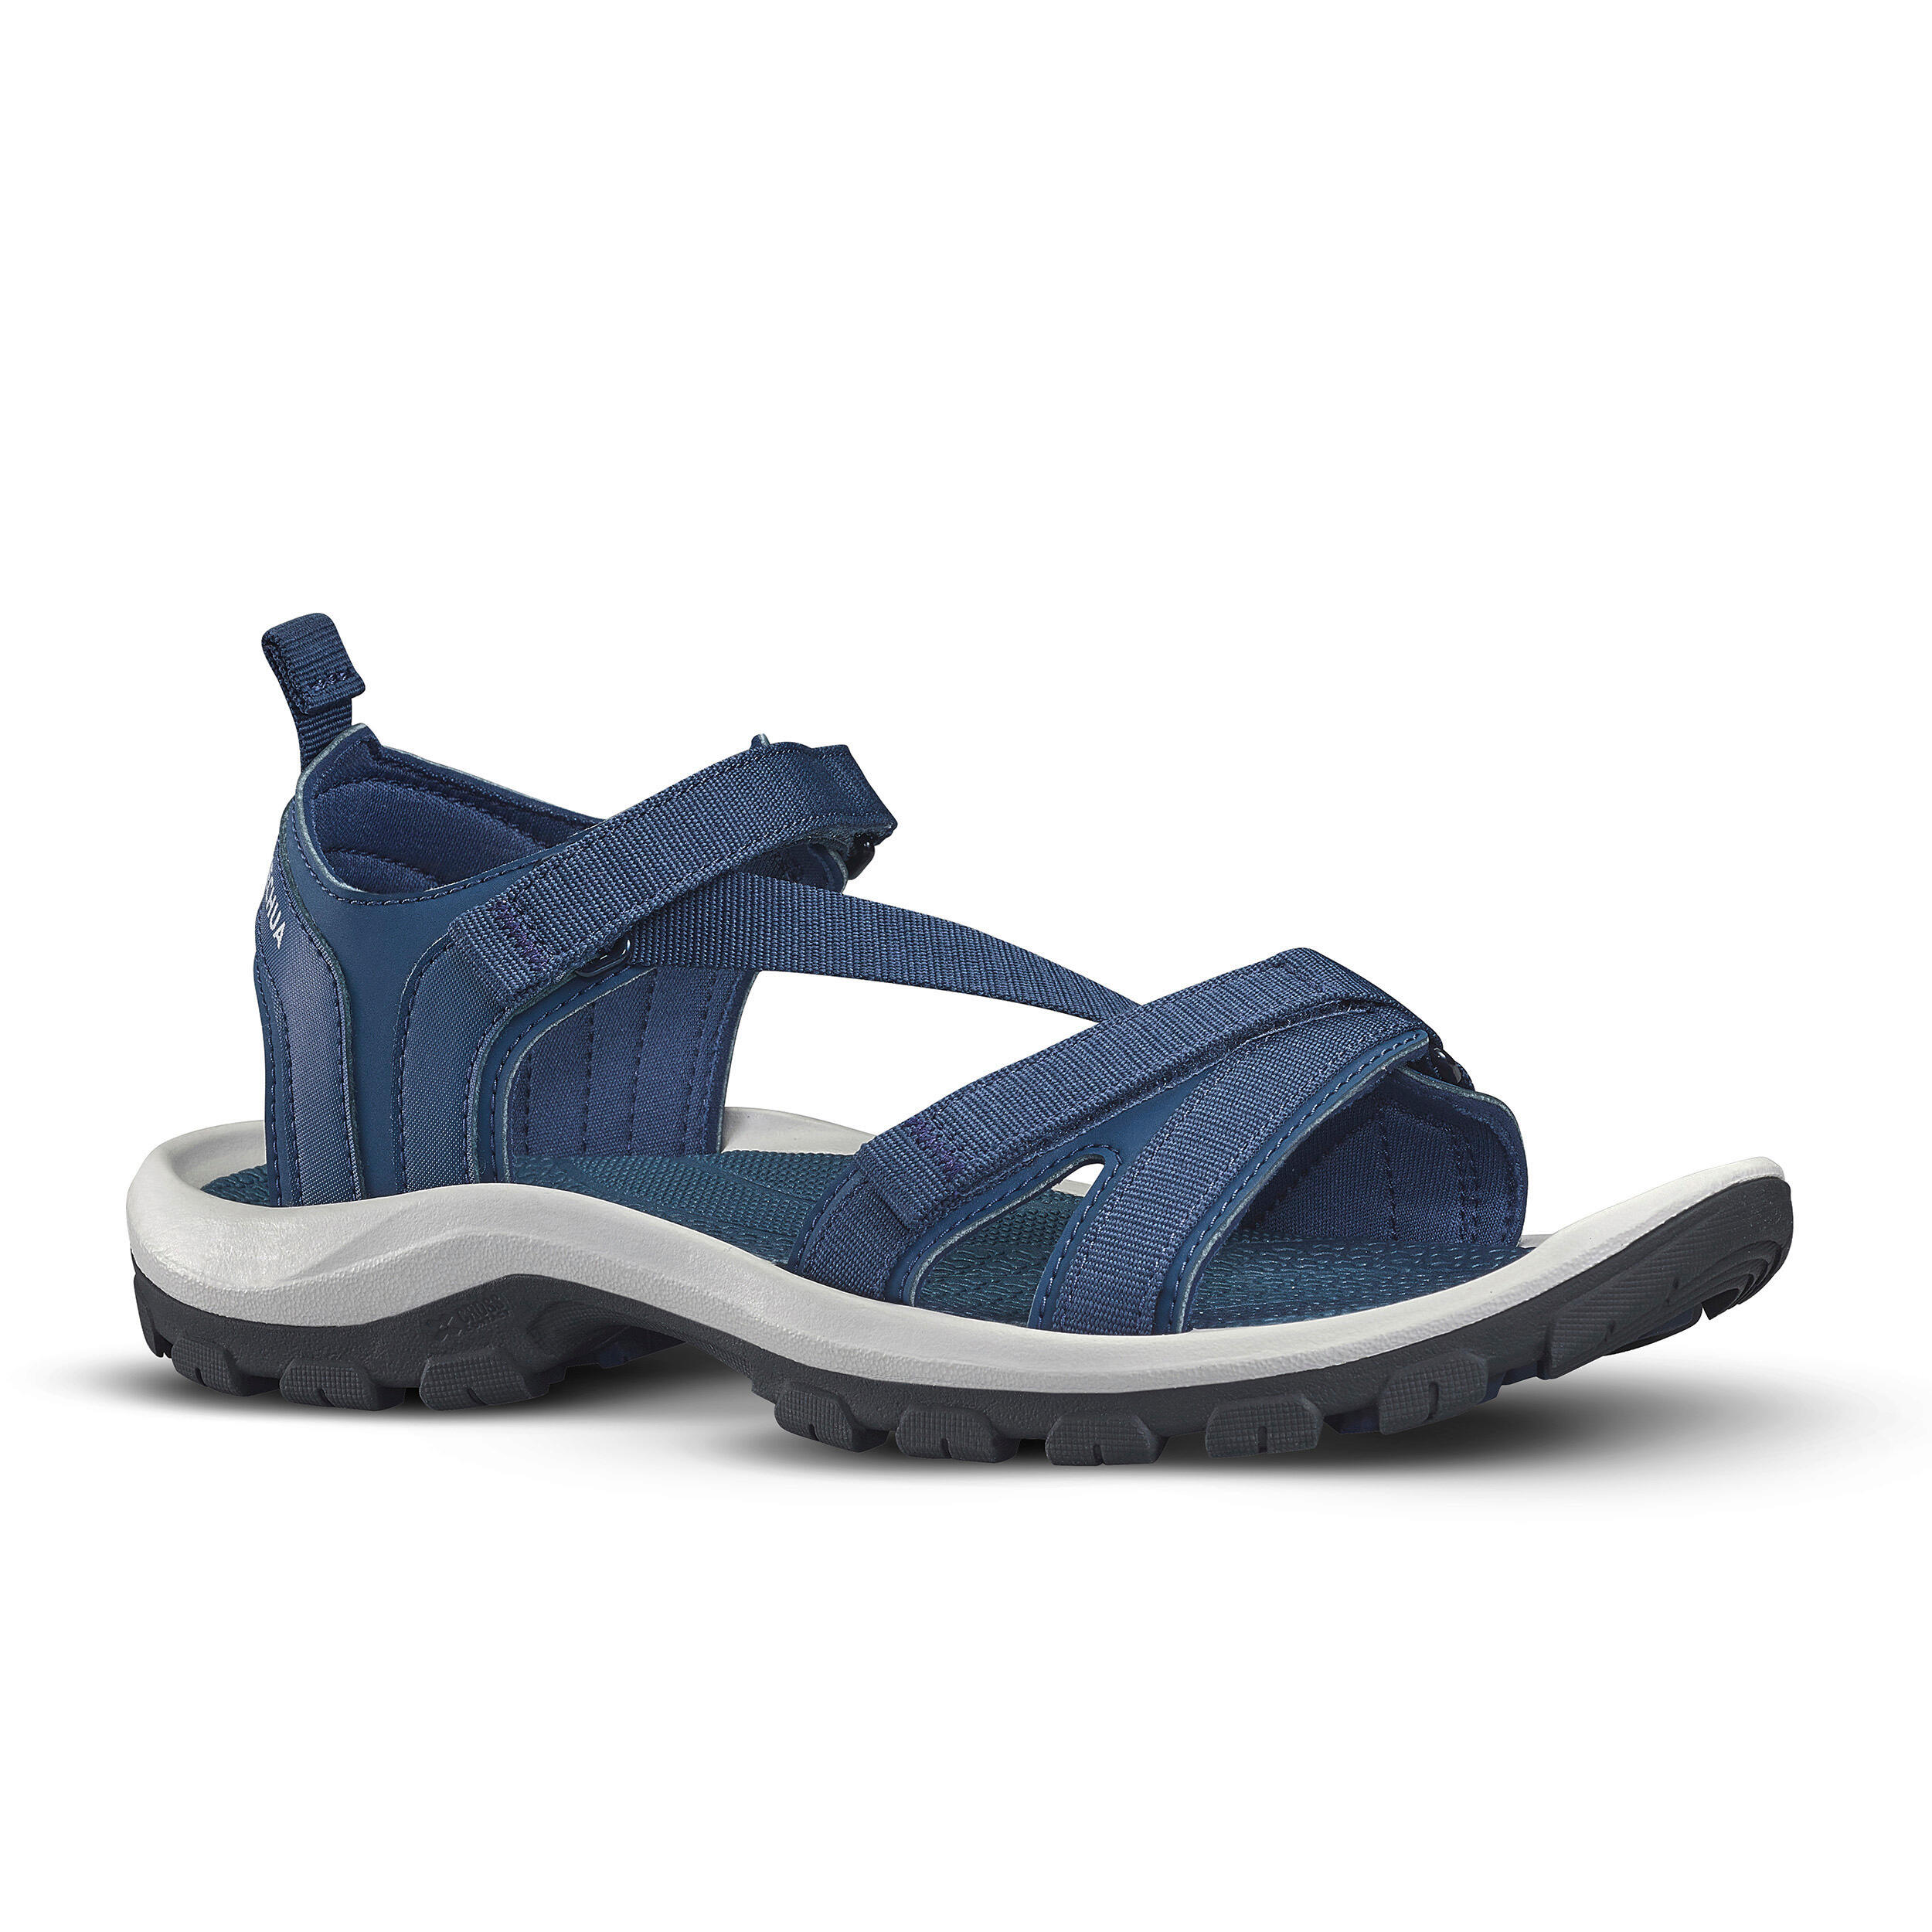 Summer Unisex Decathlon Slippers Fashionable Couple Beach Sandals With  Nonslip Floor Flip Flops For Home And Office Y200107 From Shanye06, $14.48  | DHgate.Com